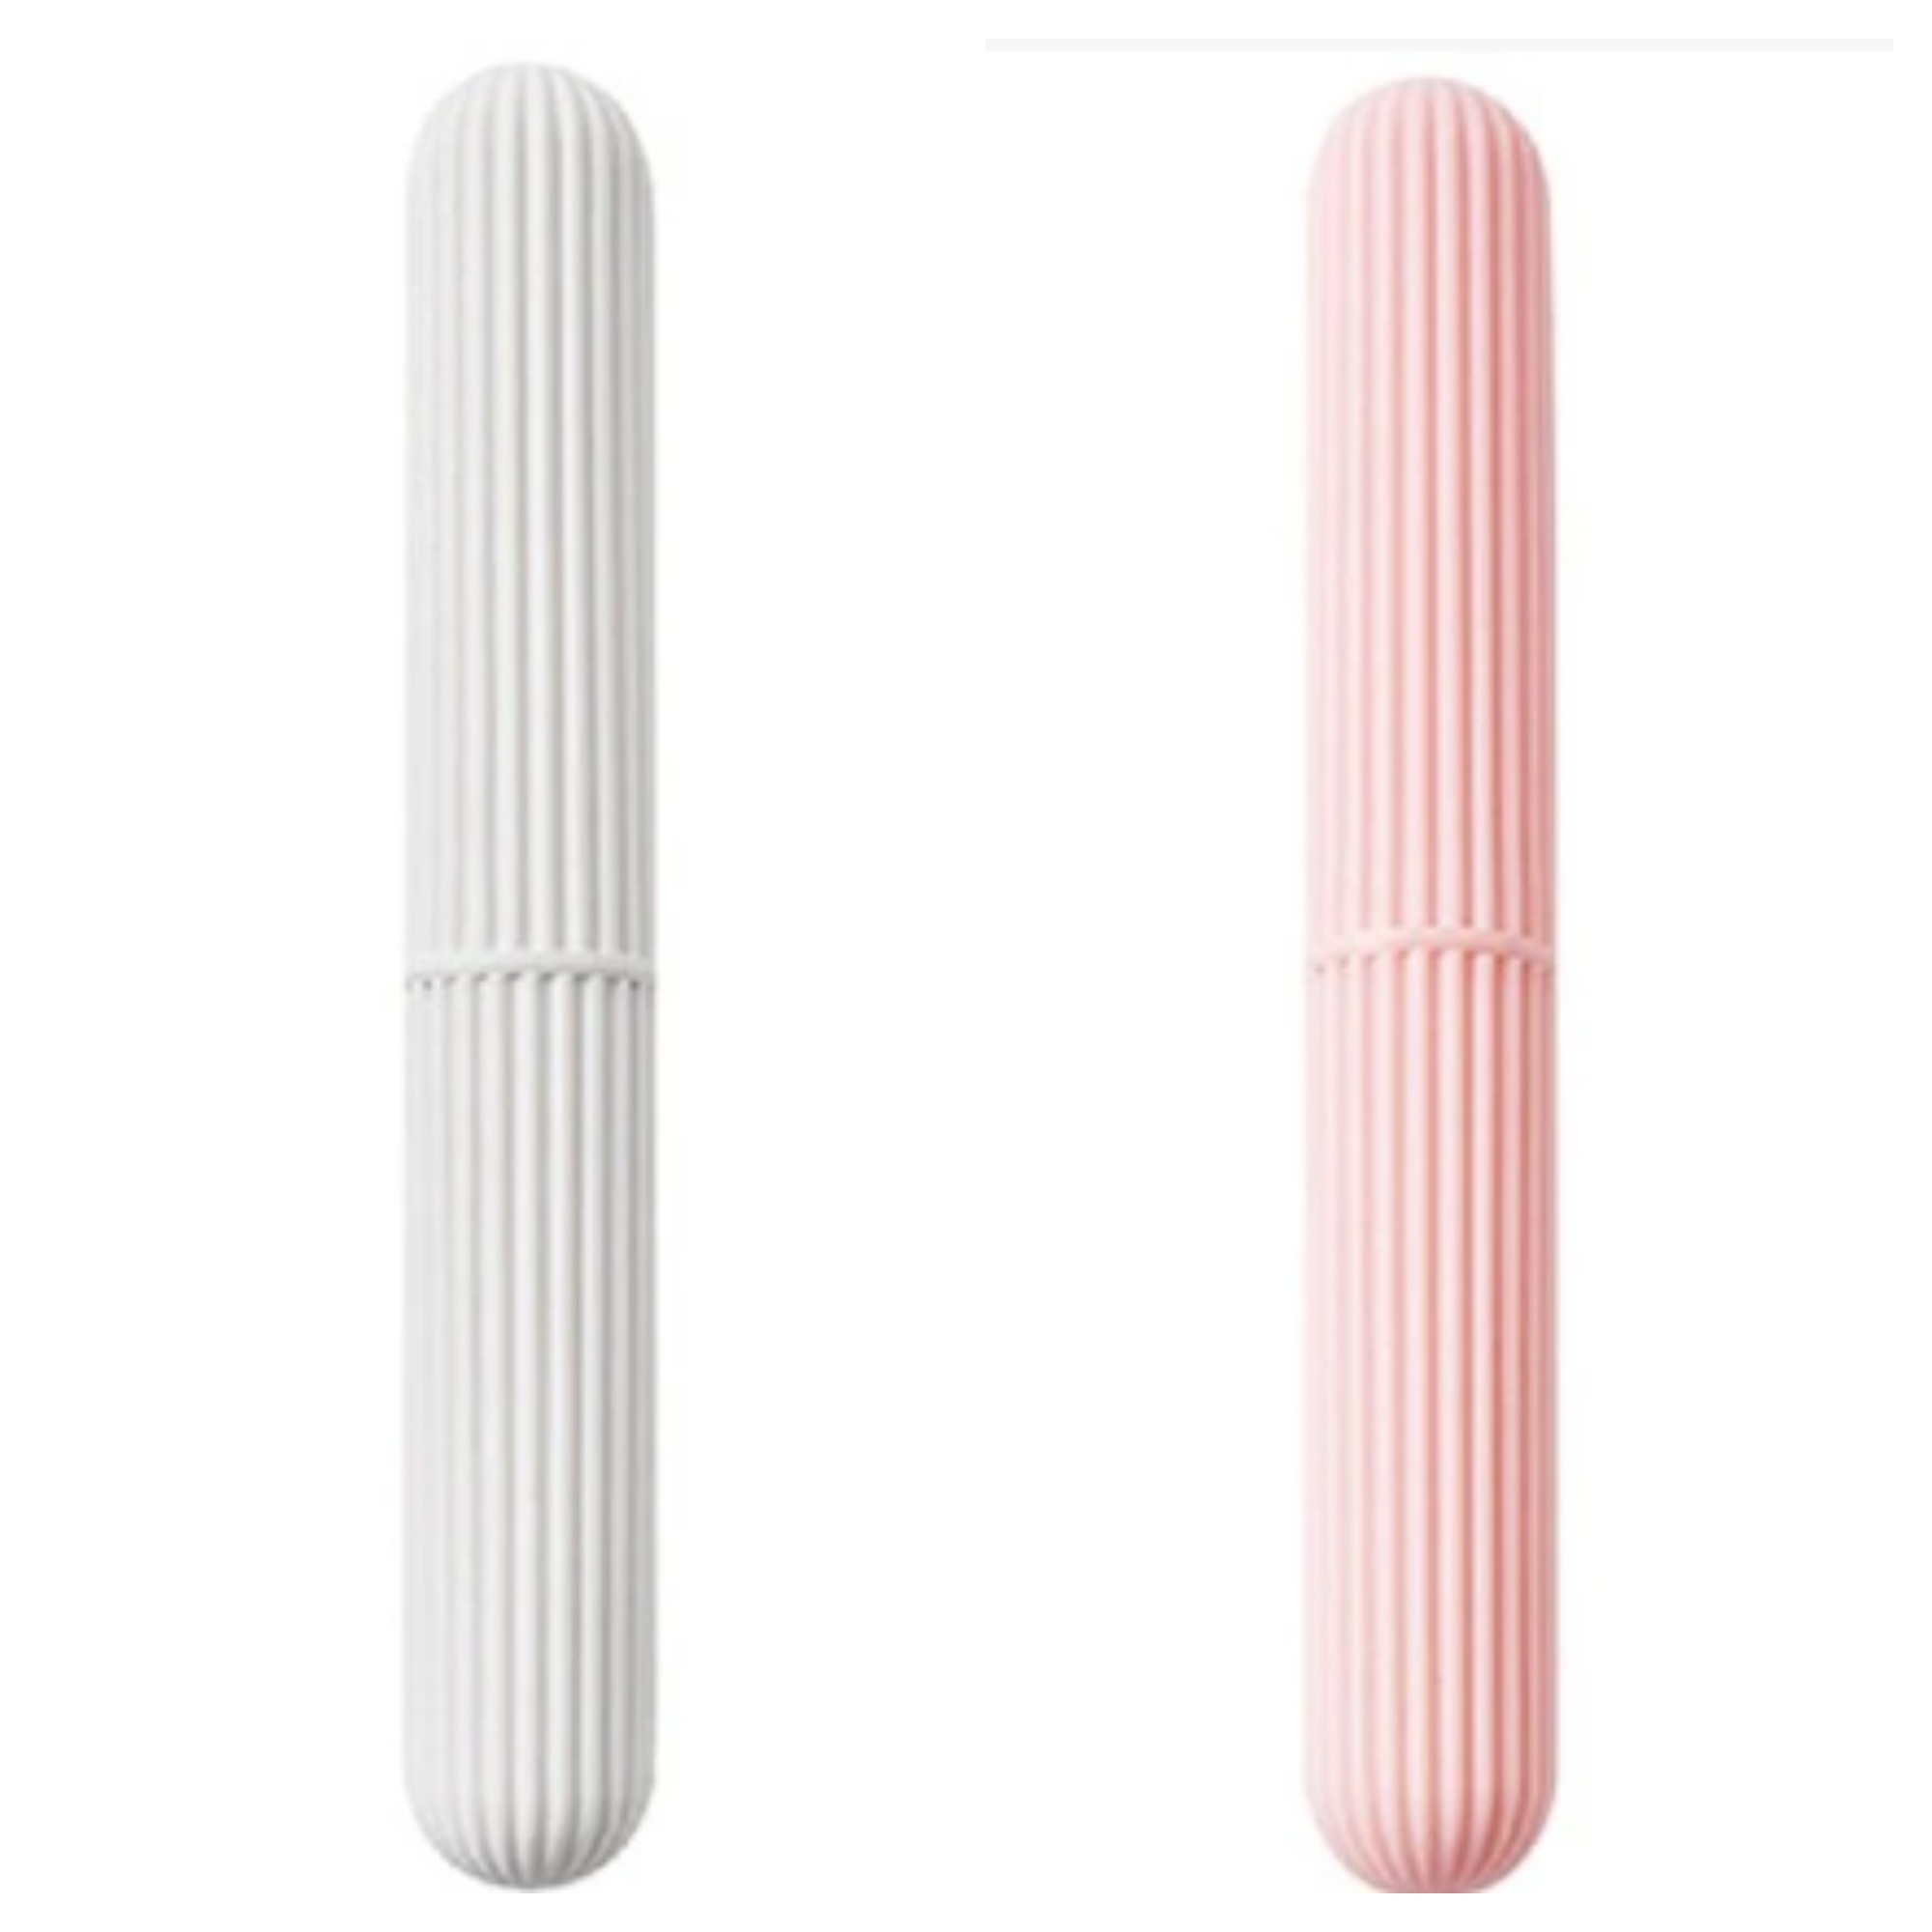 2pcs Of Bathroom Tooth Brush Holder Tube Cap Cover Protect Case Box Toothbrush